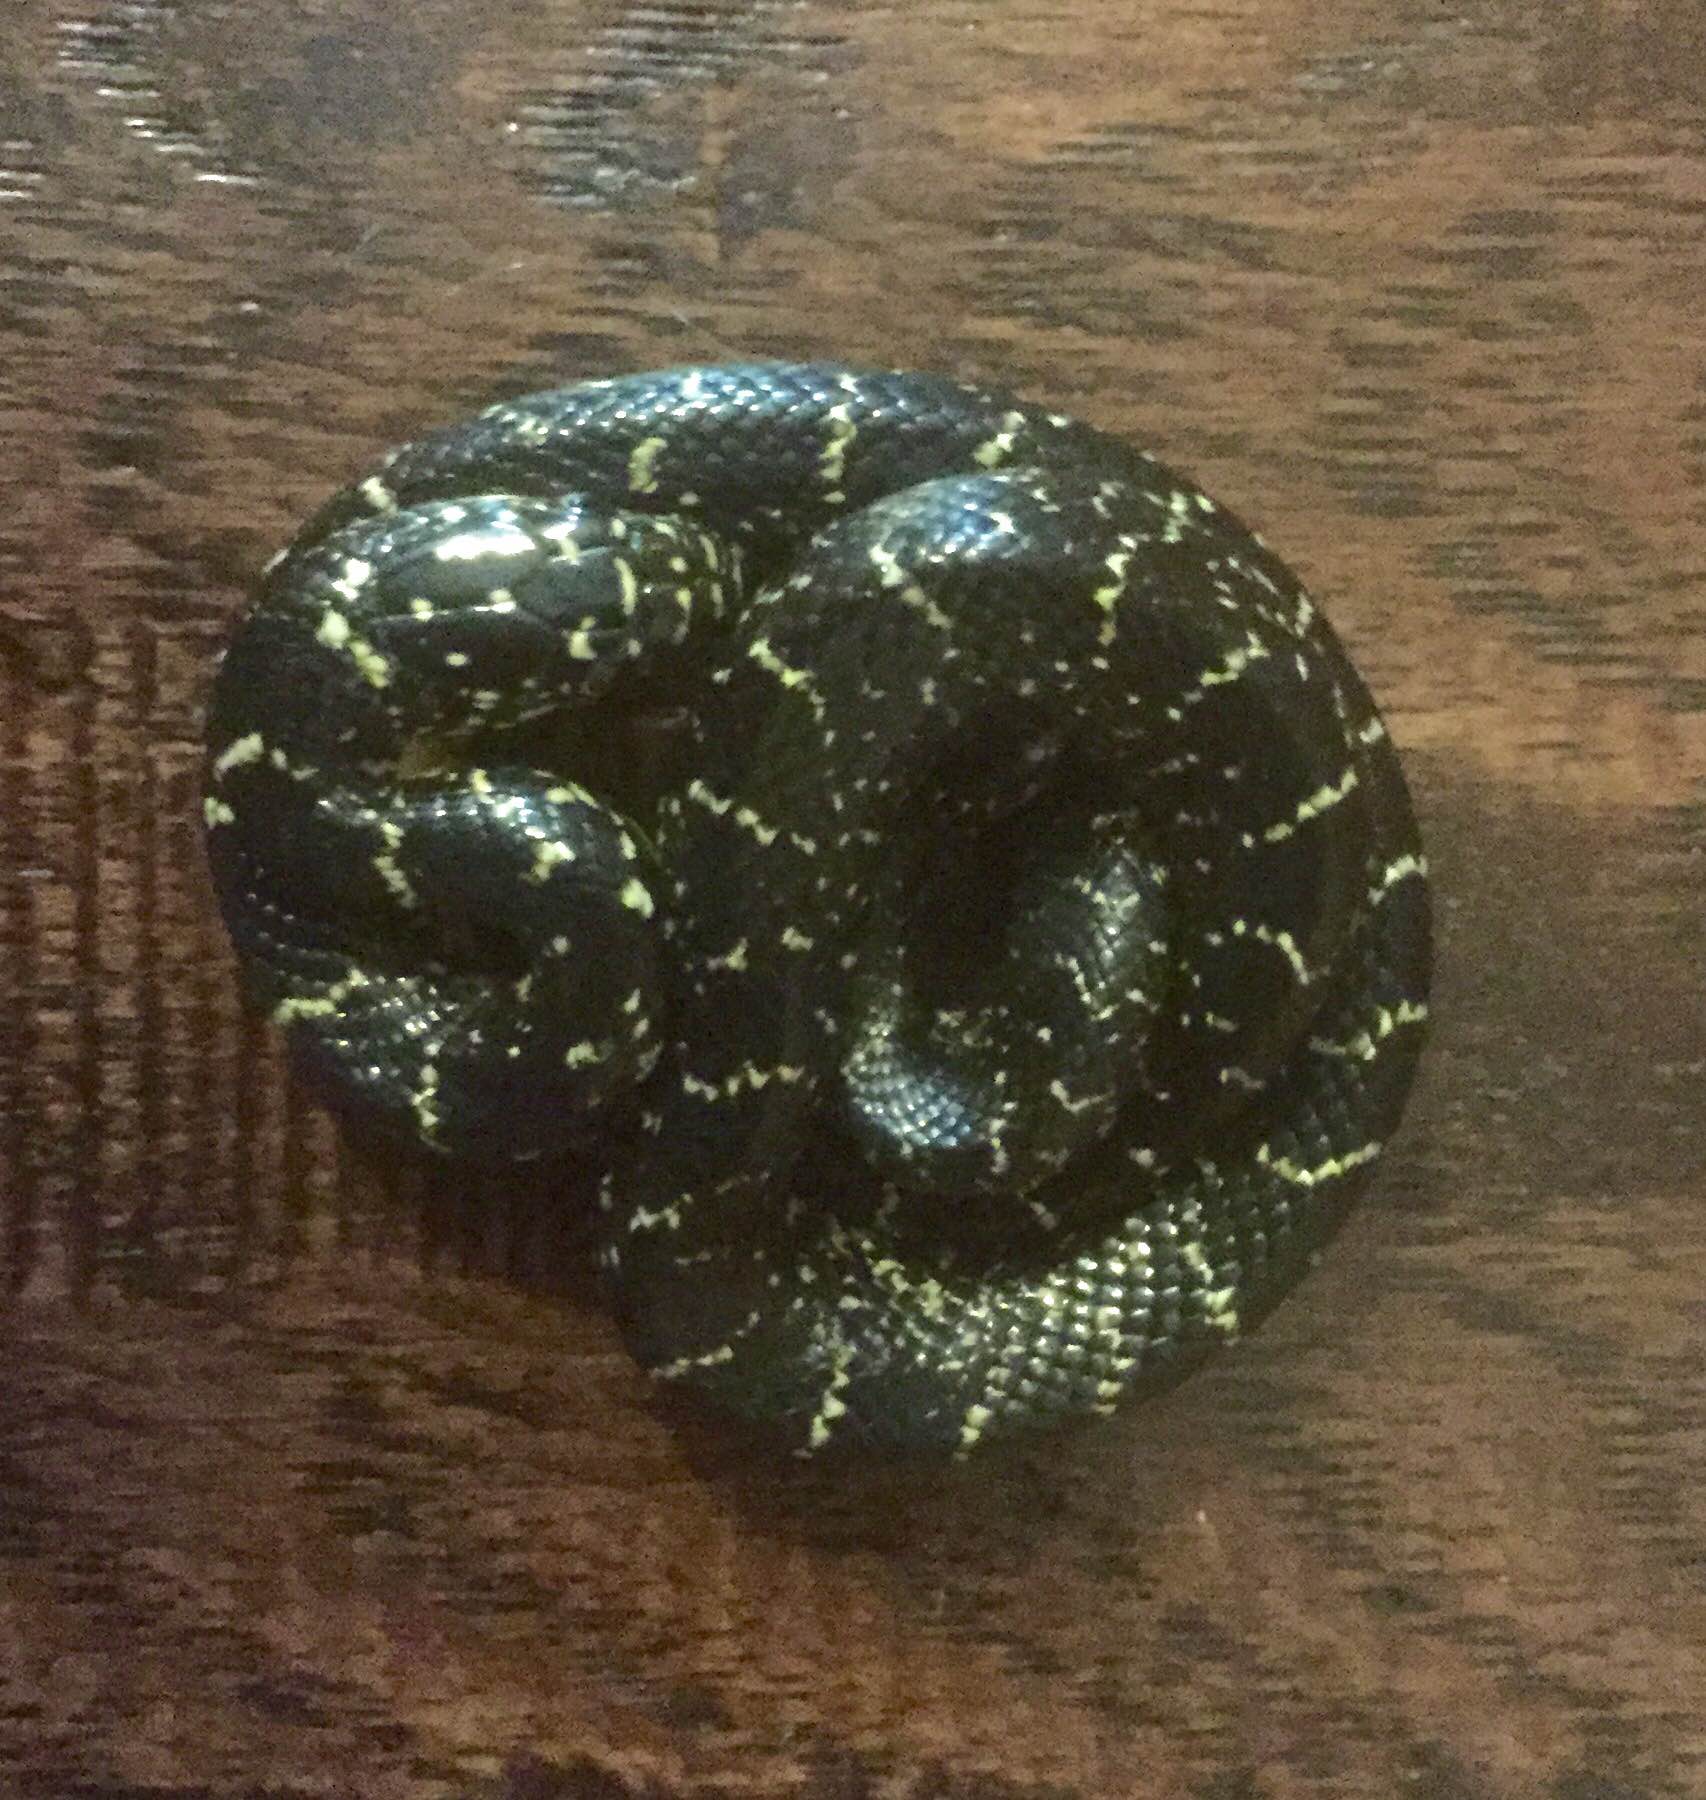 east tennessee snake identification